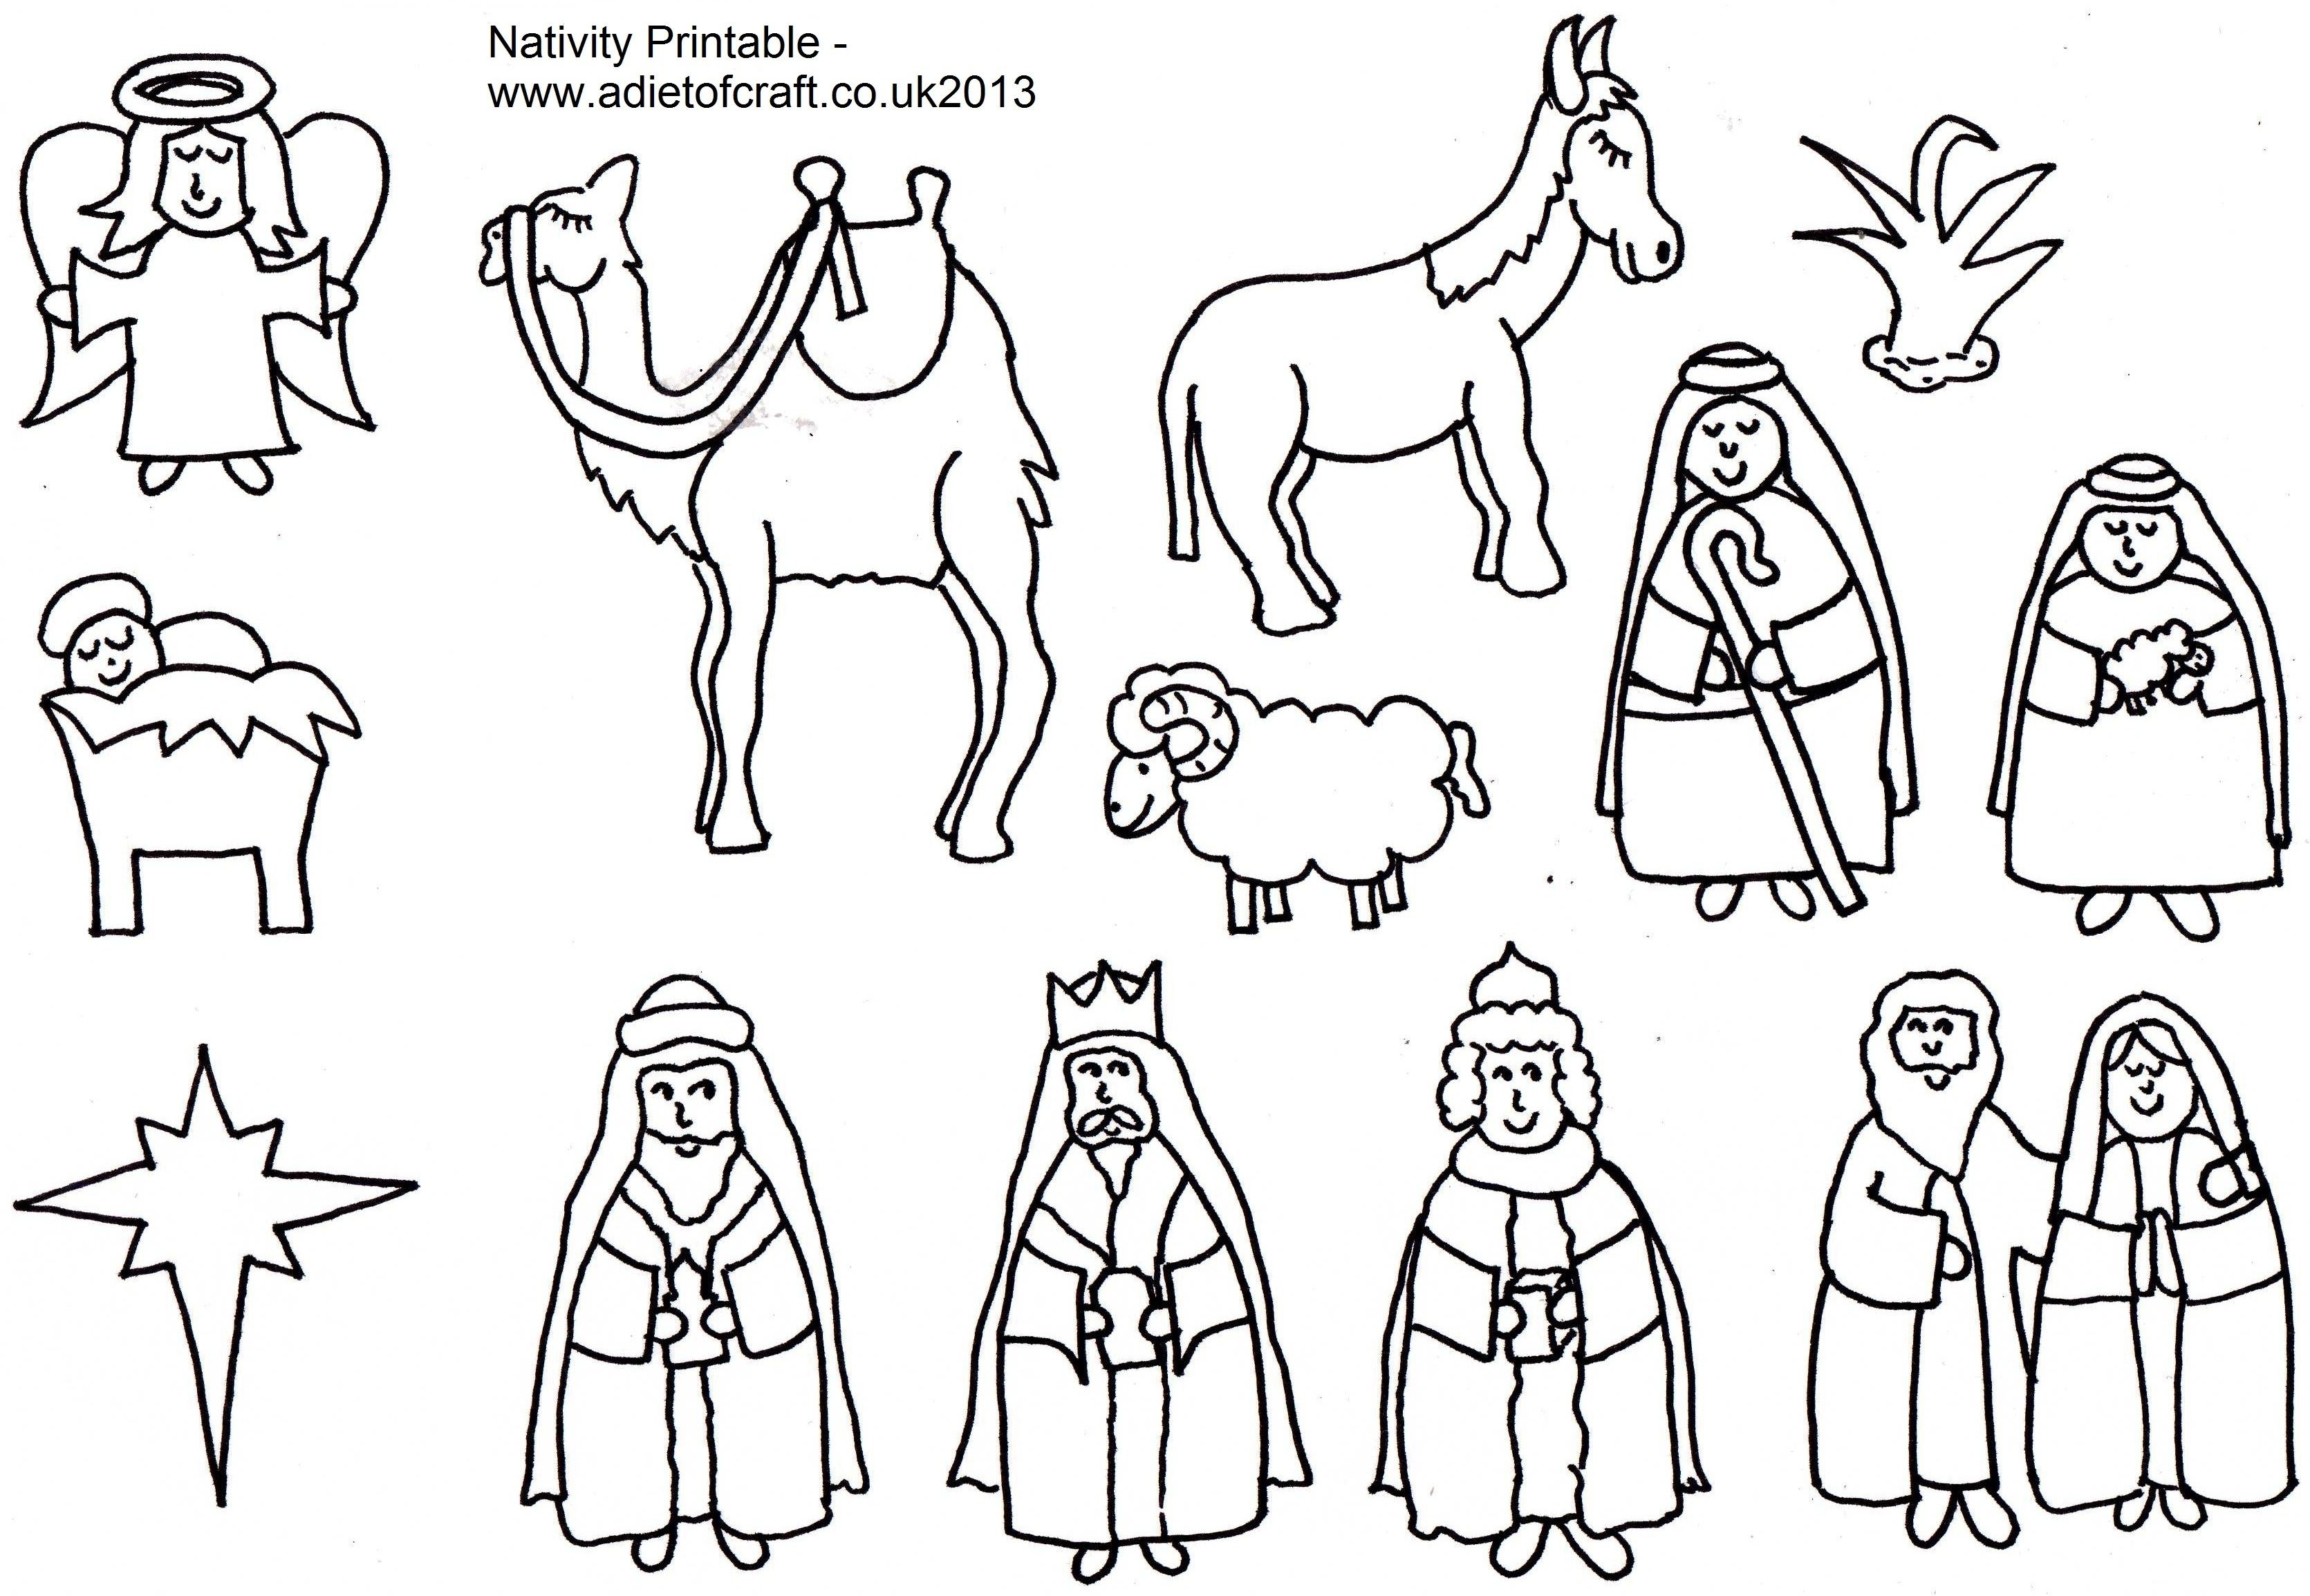 Adult Coloring Pages Of The Nativity Free In Nativity Coloring Pages - Free Printable Nativity Story Coloring Pages